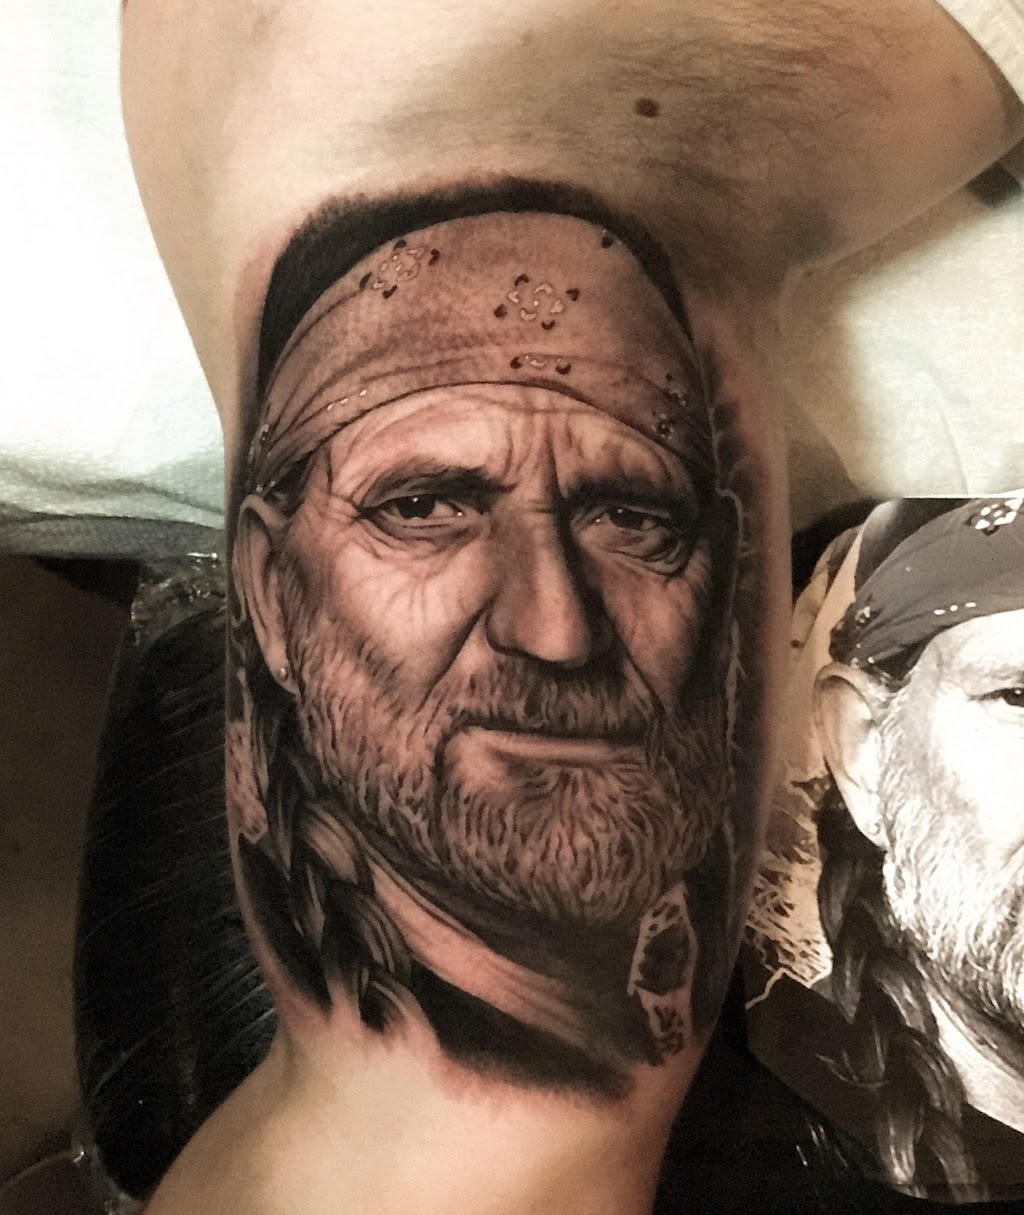 Faces in the Dark Tattoo | 121 Hall Professional Center E, Kyle, TX 78640, USA | Phone: (512) 504-9988